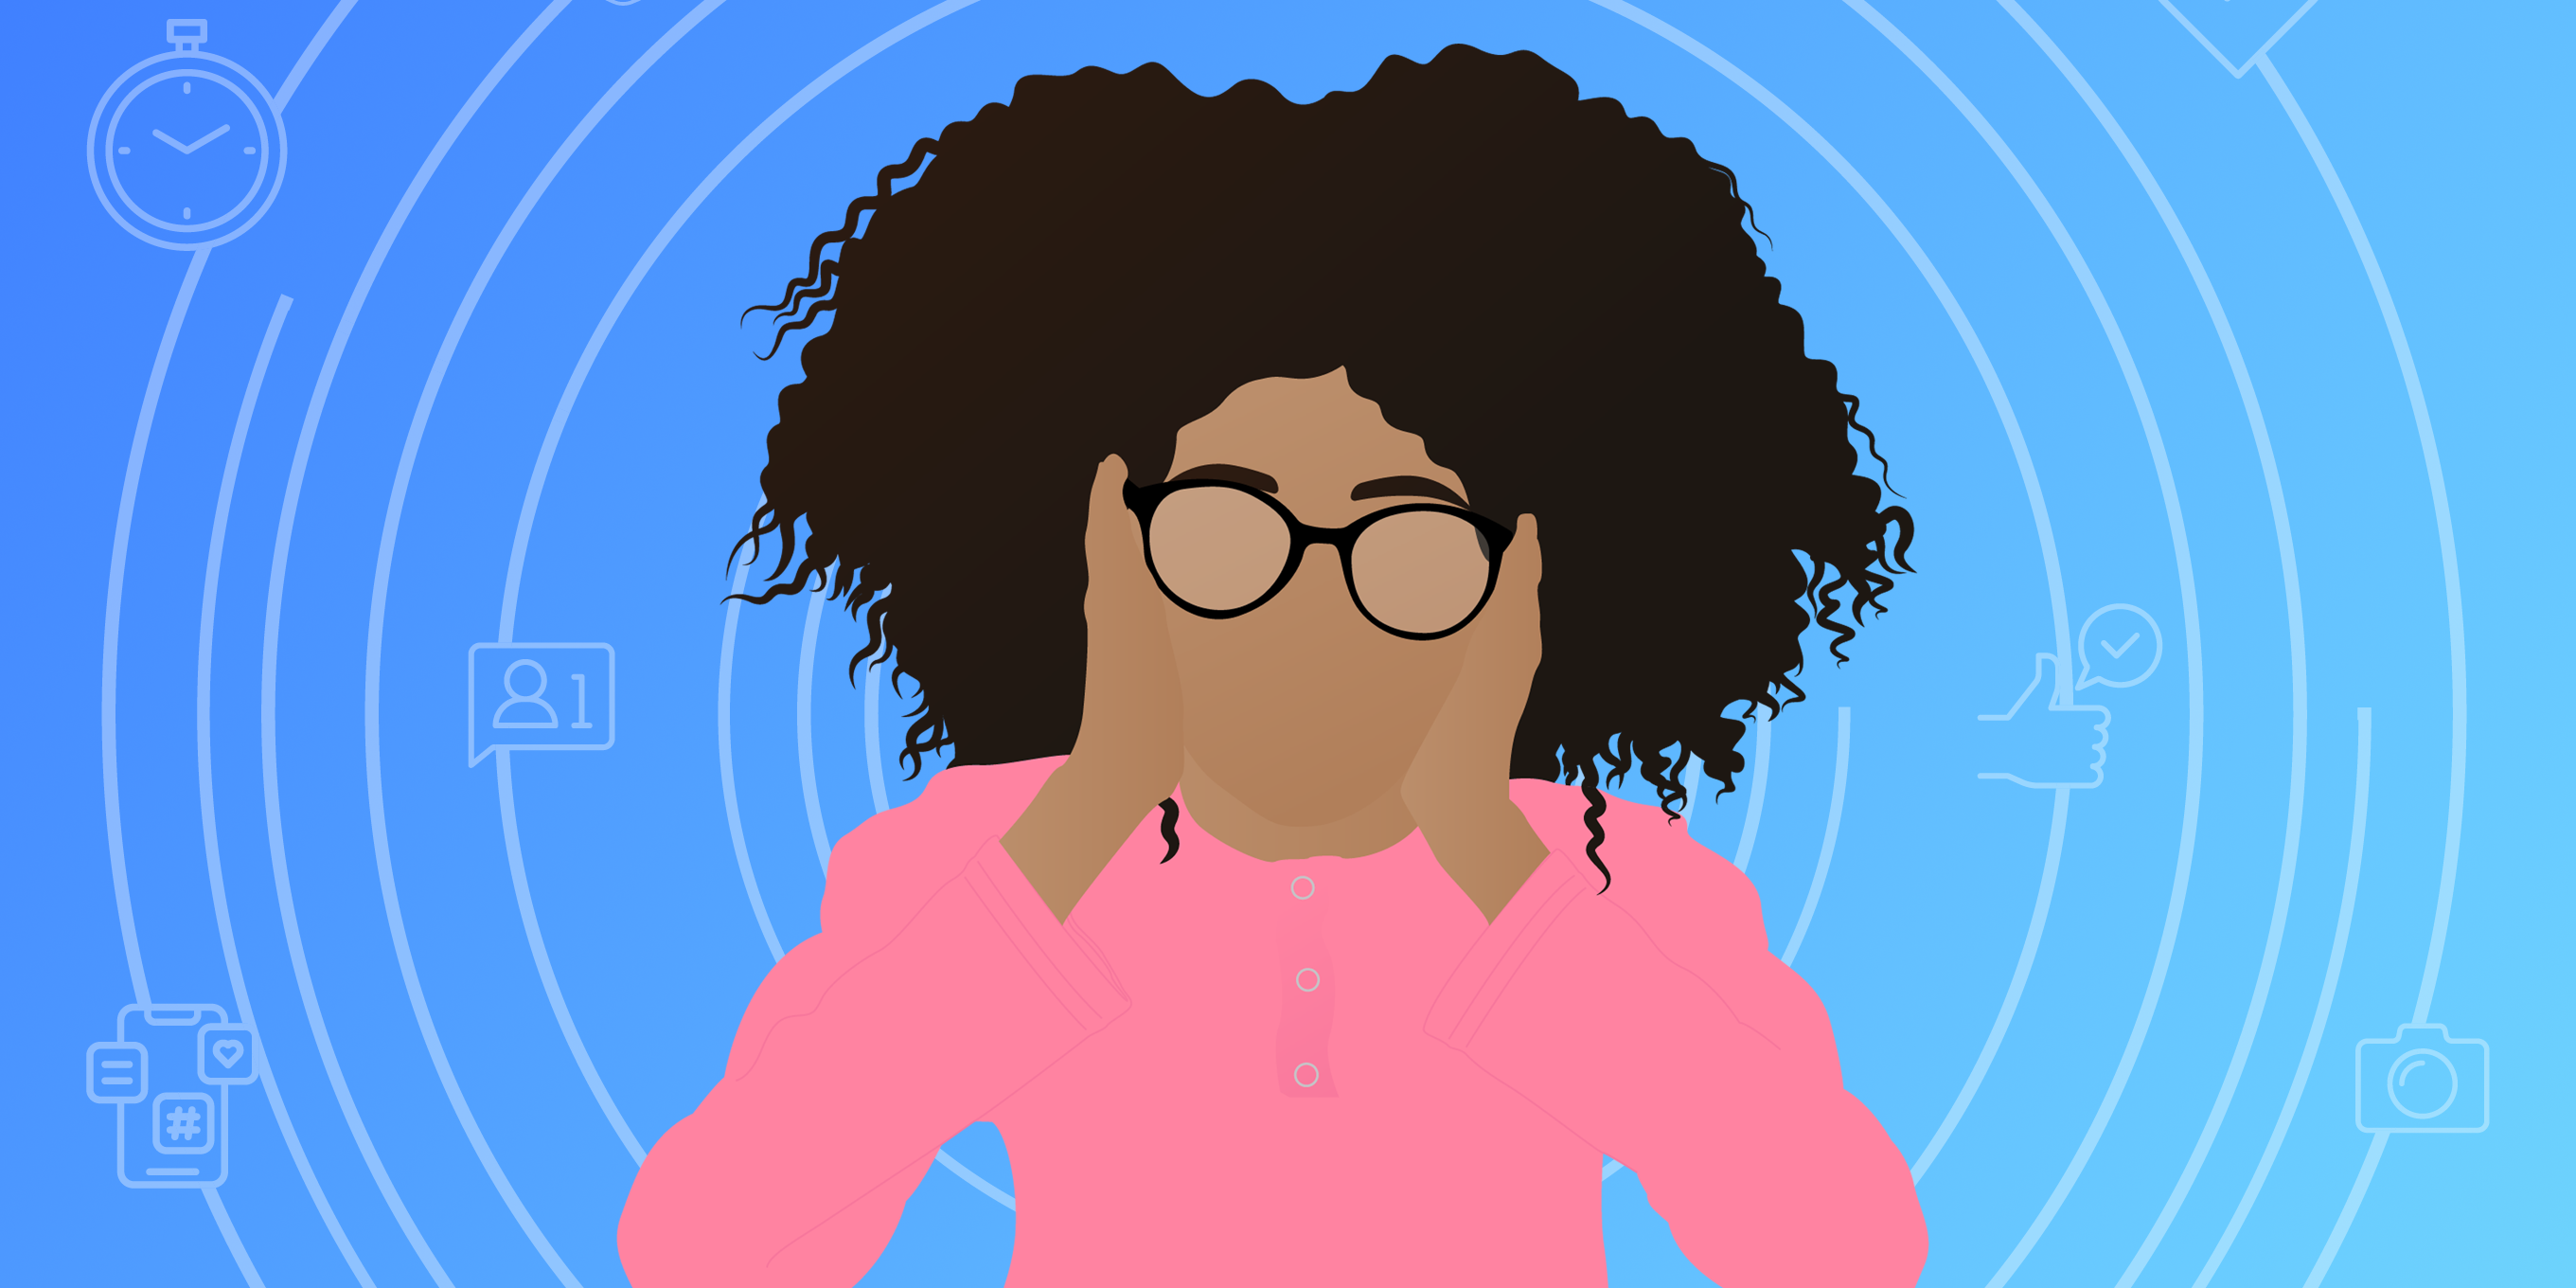 A girl with curly hair and pink shirt and glasses has her hands against her face while looking worried.m 